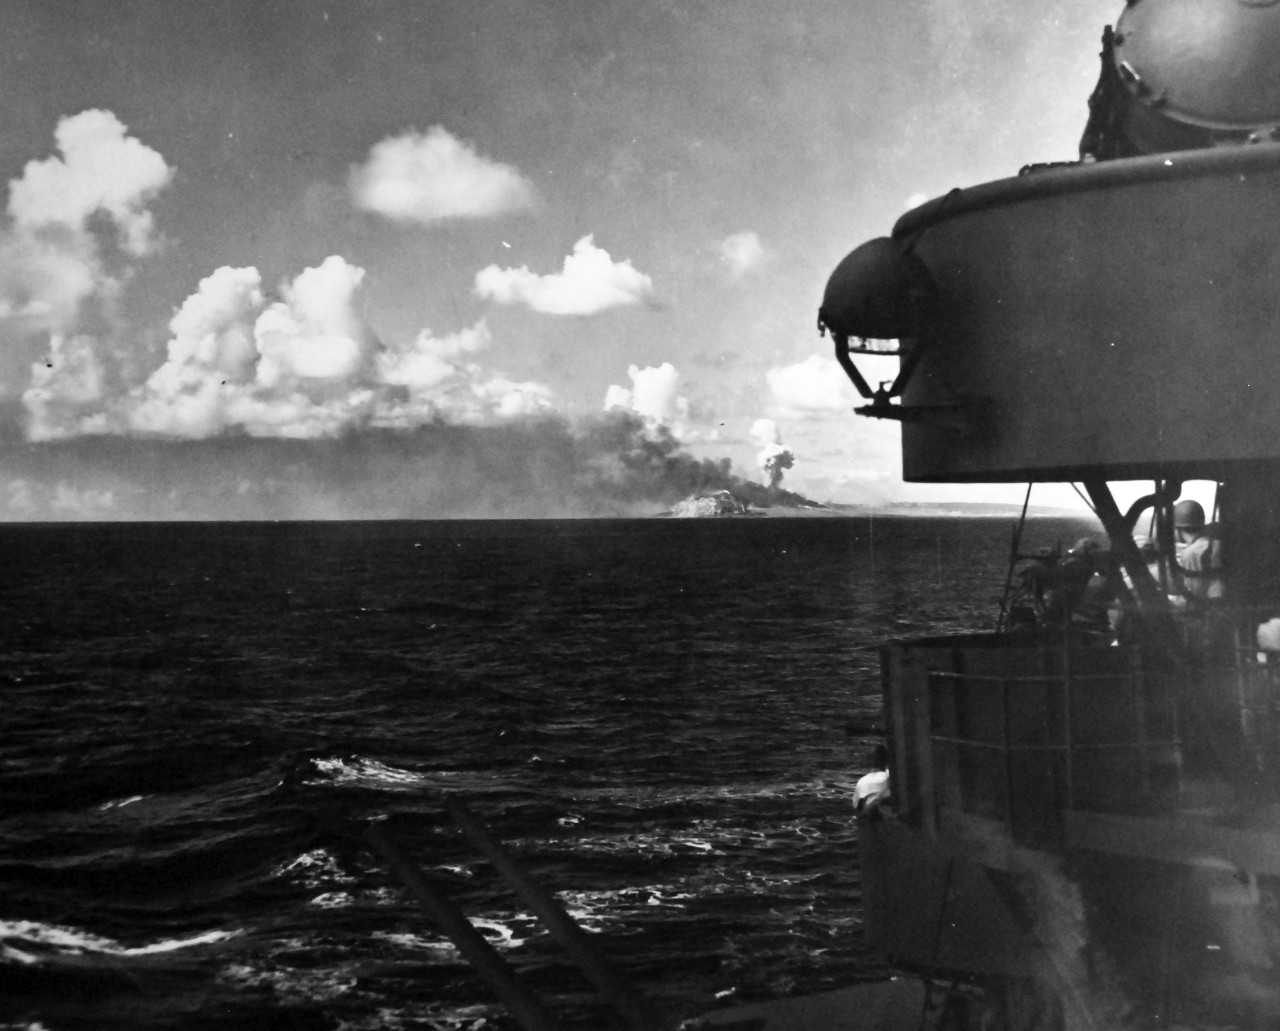 80-G-342247:  Battle for Iwo Jima, February-March 1945.  Bombardment of Iwo Jima, prior to the U.S. Marine invasion.  Mount Suribachi is in the foreground.   Photograph received 27 July 1945.  Official U.S. Navy Photograph, now in the collections of the National Archives.  (2013/08/14).  